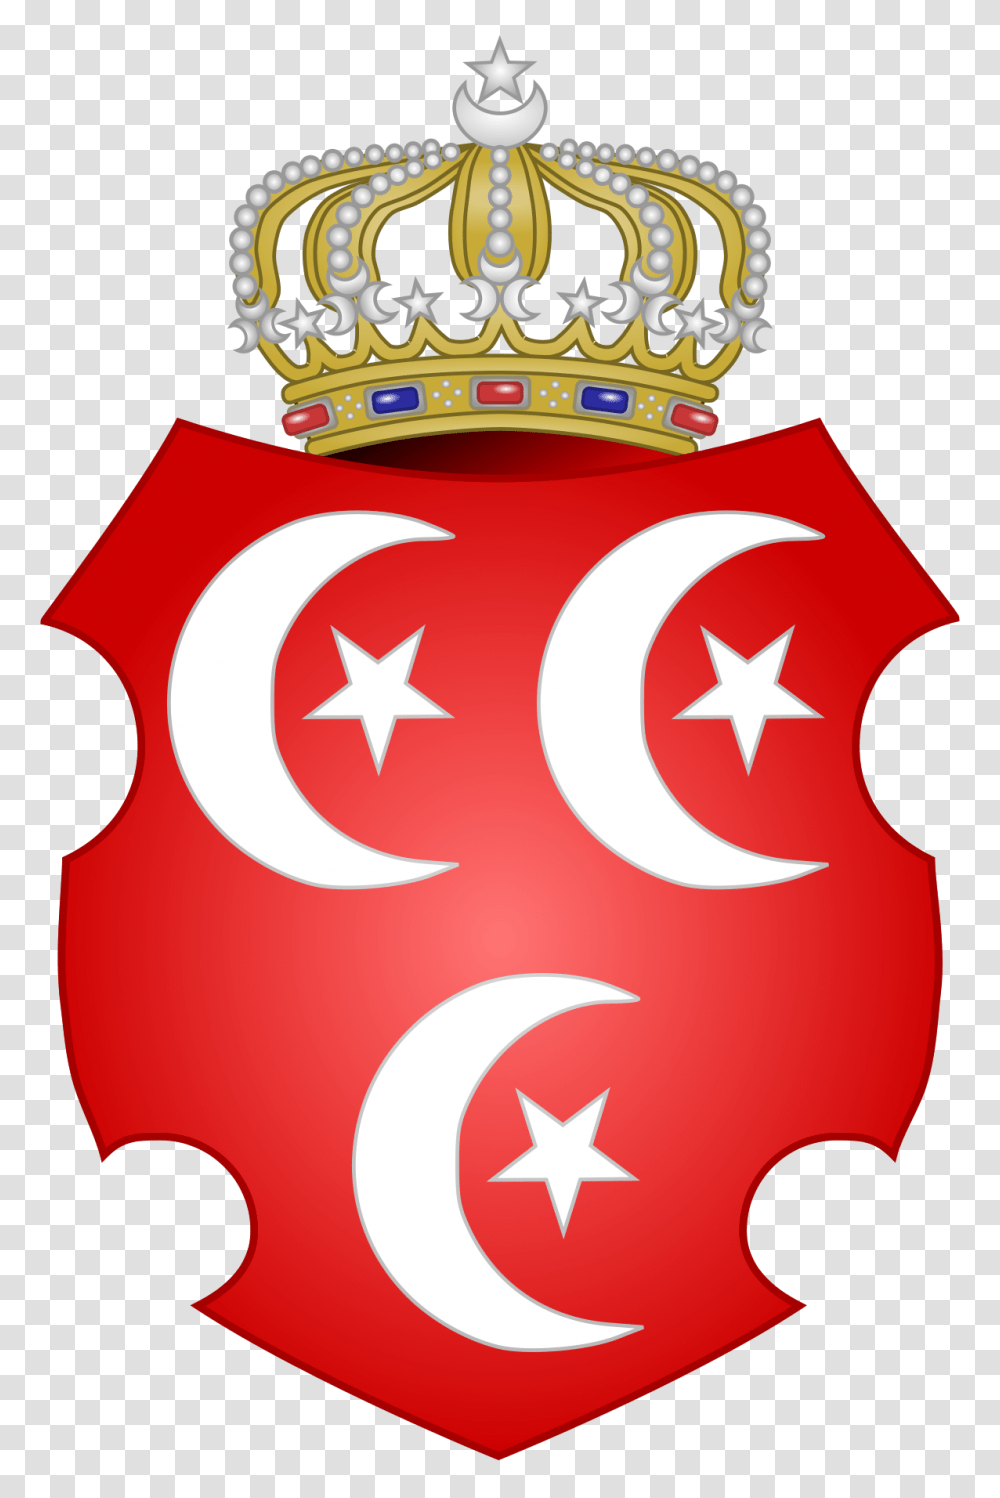 List Of Monarchs Of The Muhammad Ali Dynasty, Jewelry, Accessories, Accessory Transparent Png